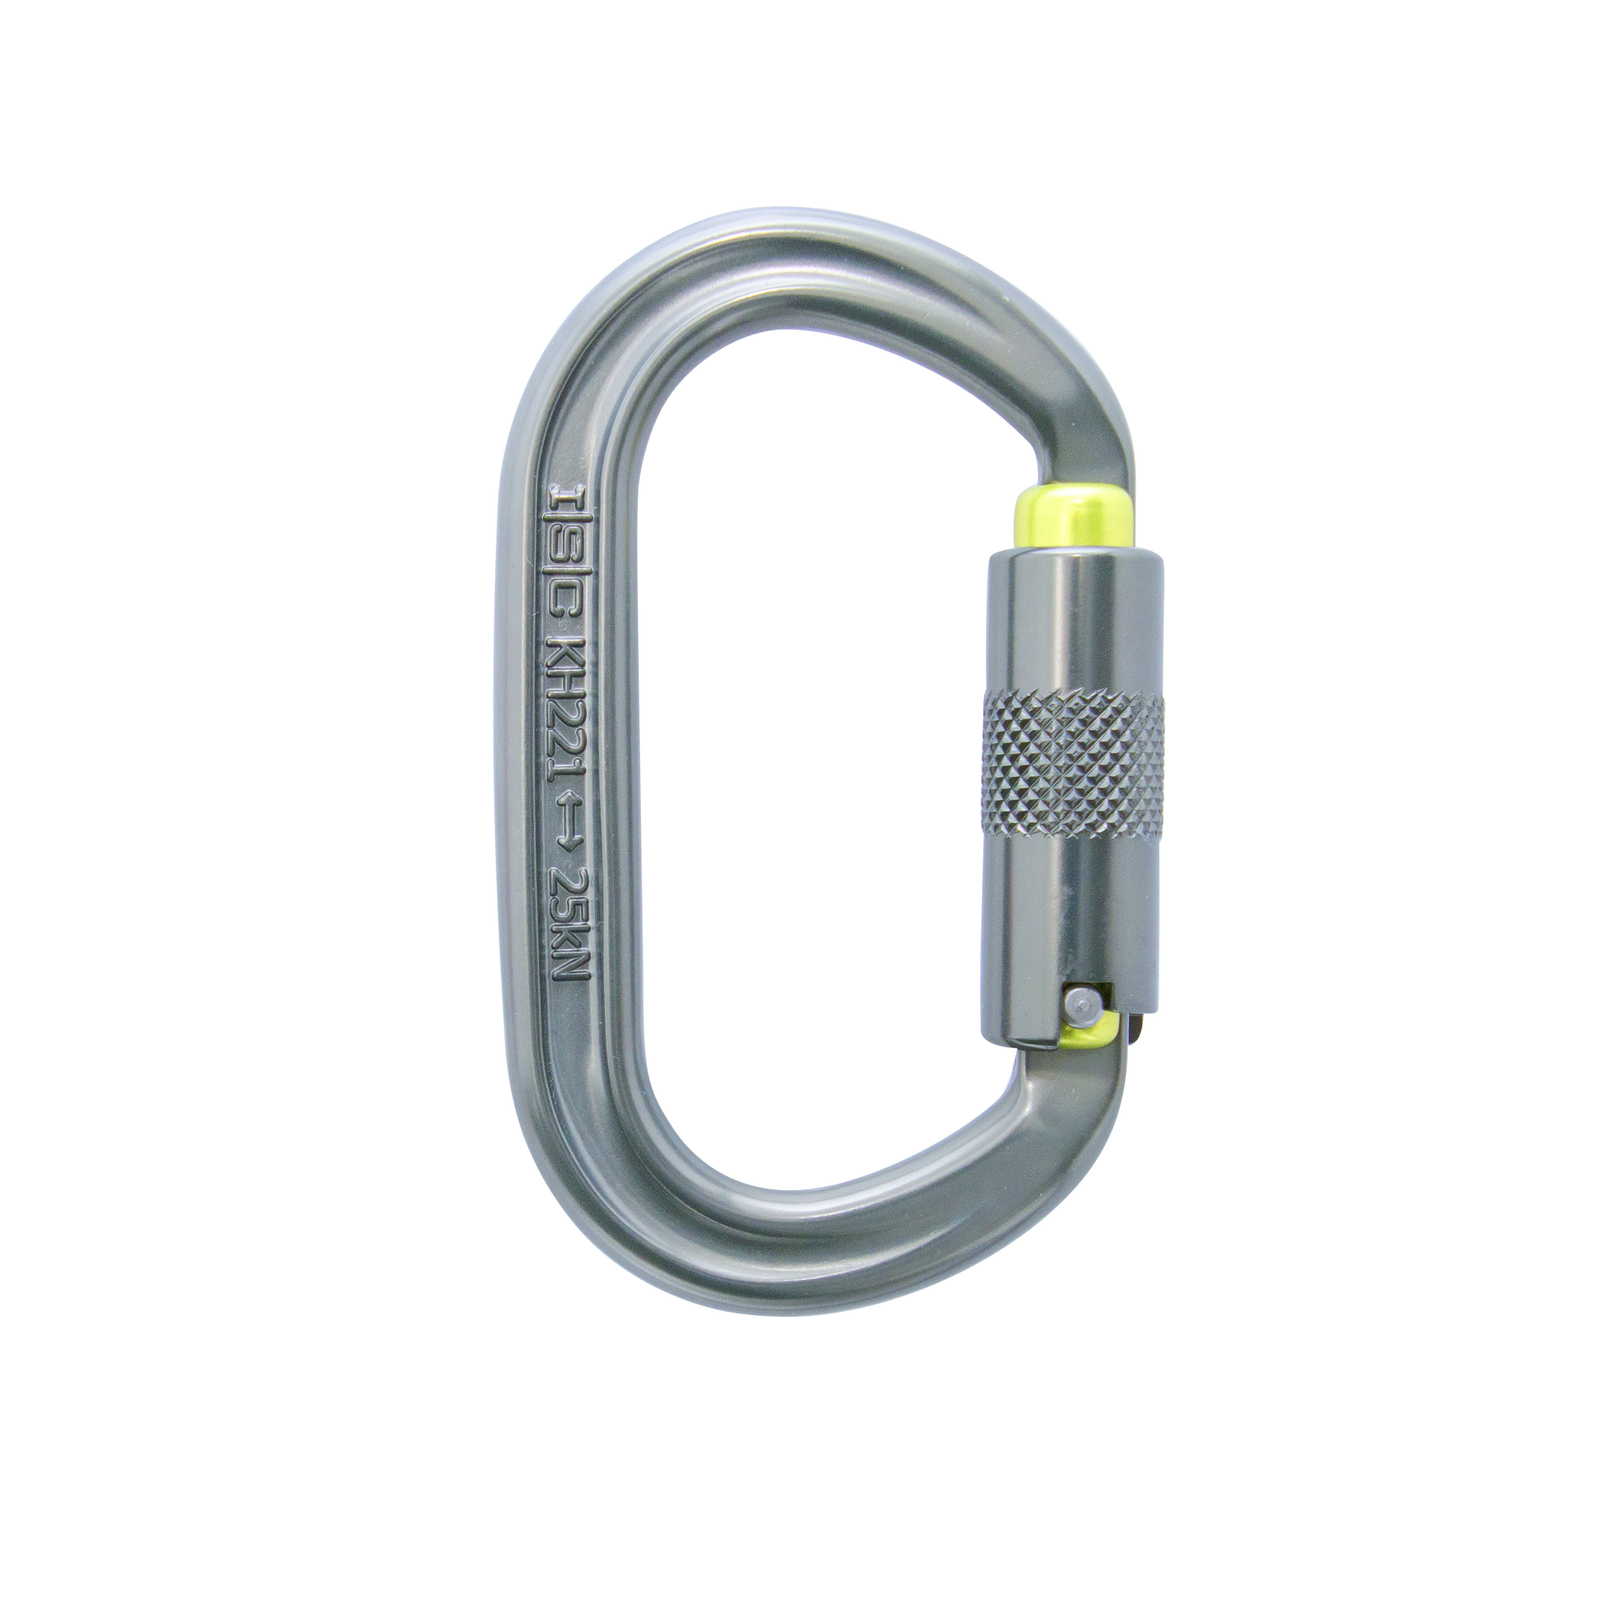 ISC OVAL KARABINER 3 Pack - Lowest prices & free shipping